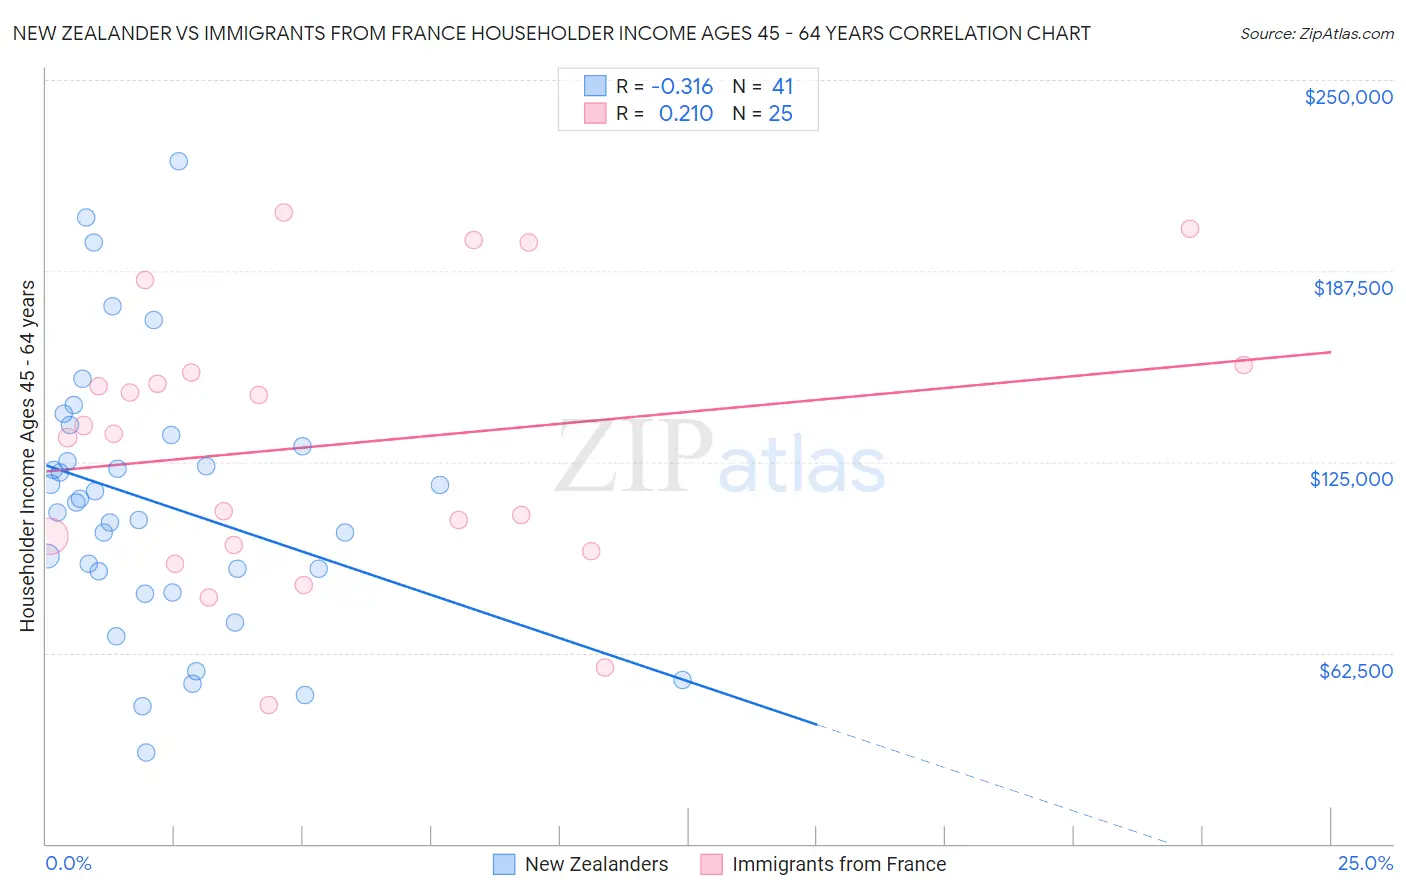 New Zealander vs Immigrants from France Householder Income Ages 45 - 64 years